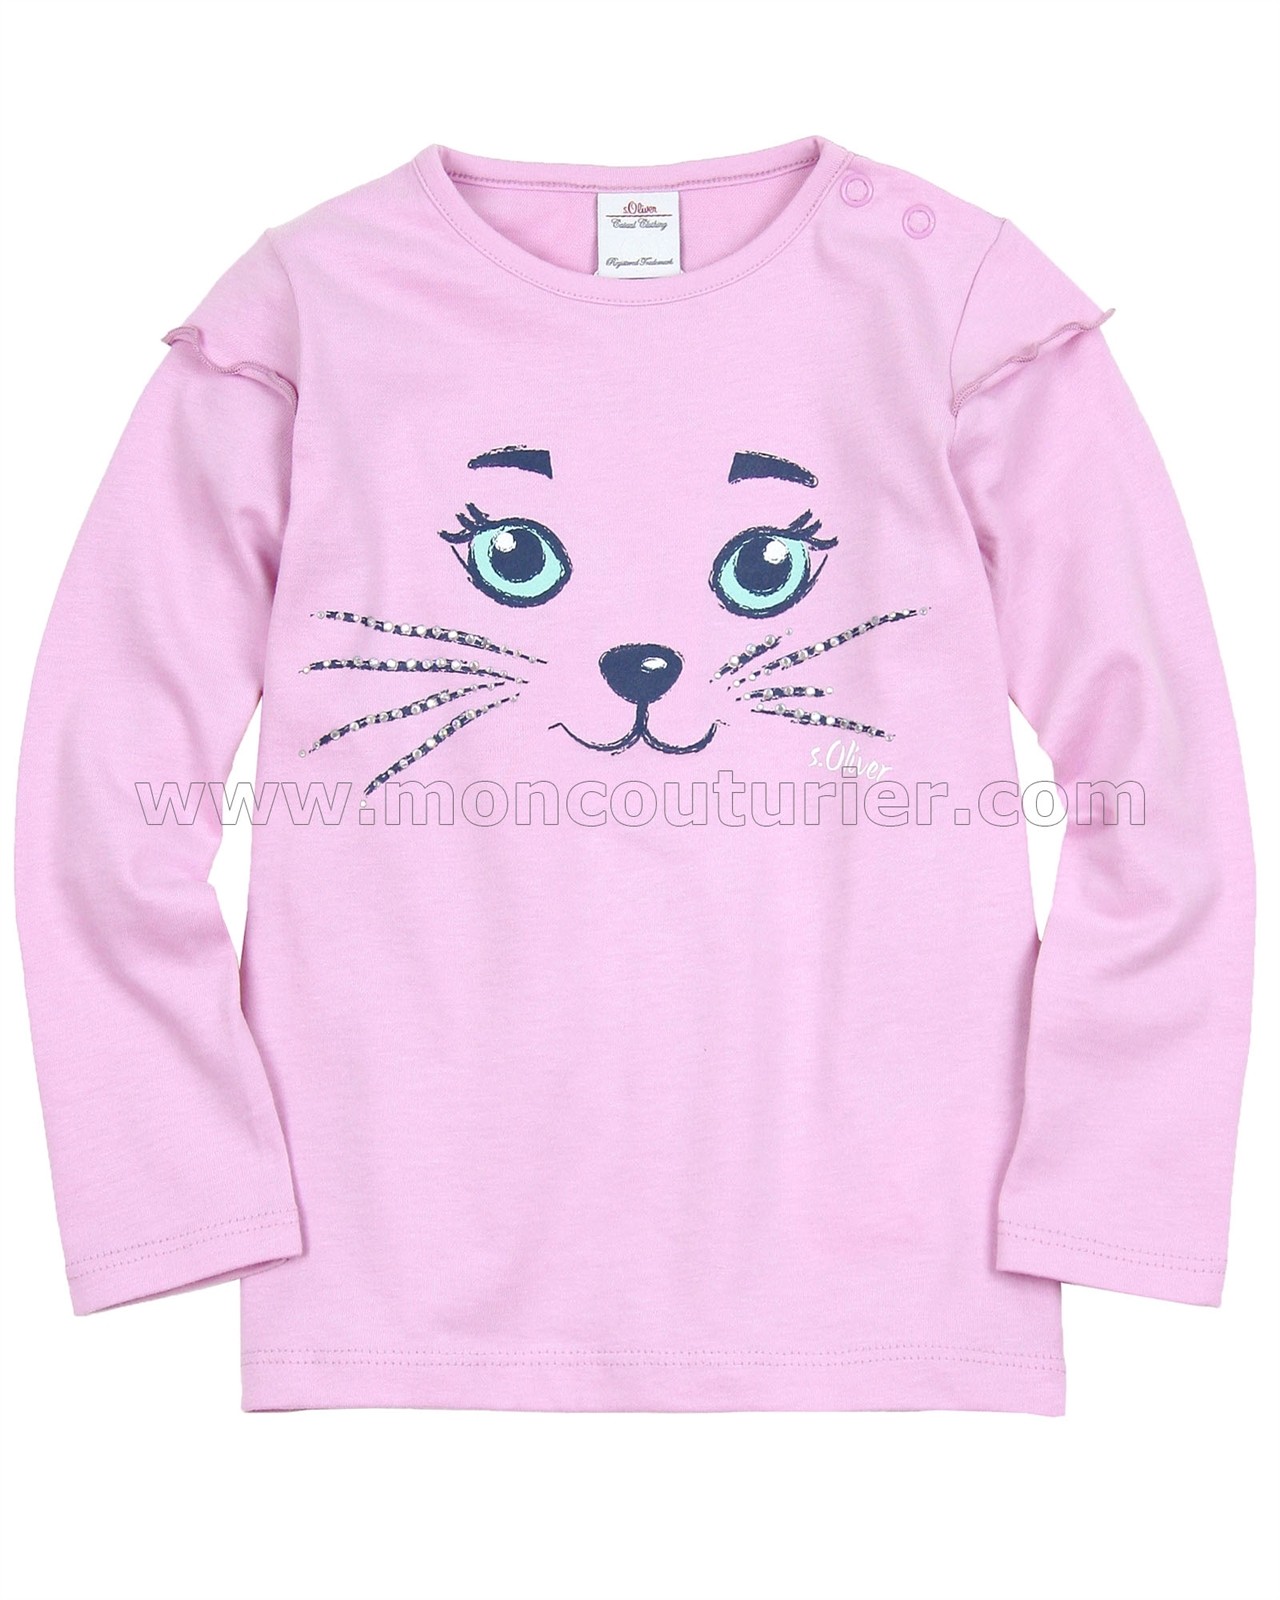 s.Oliver Baby Girls Top Cat Face Pink Pale with